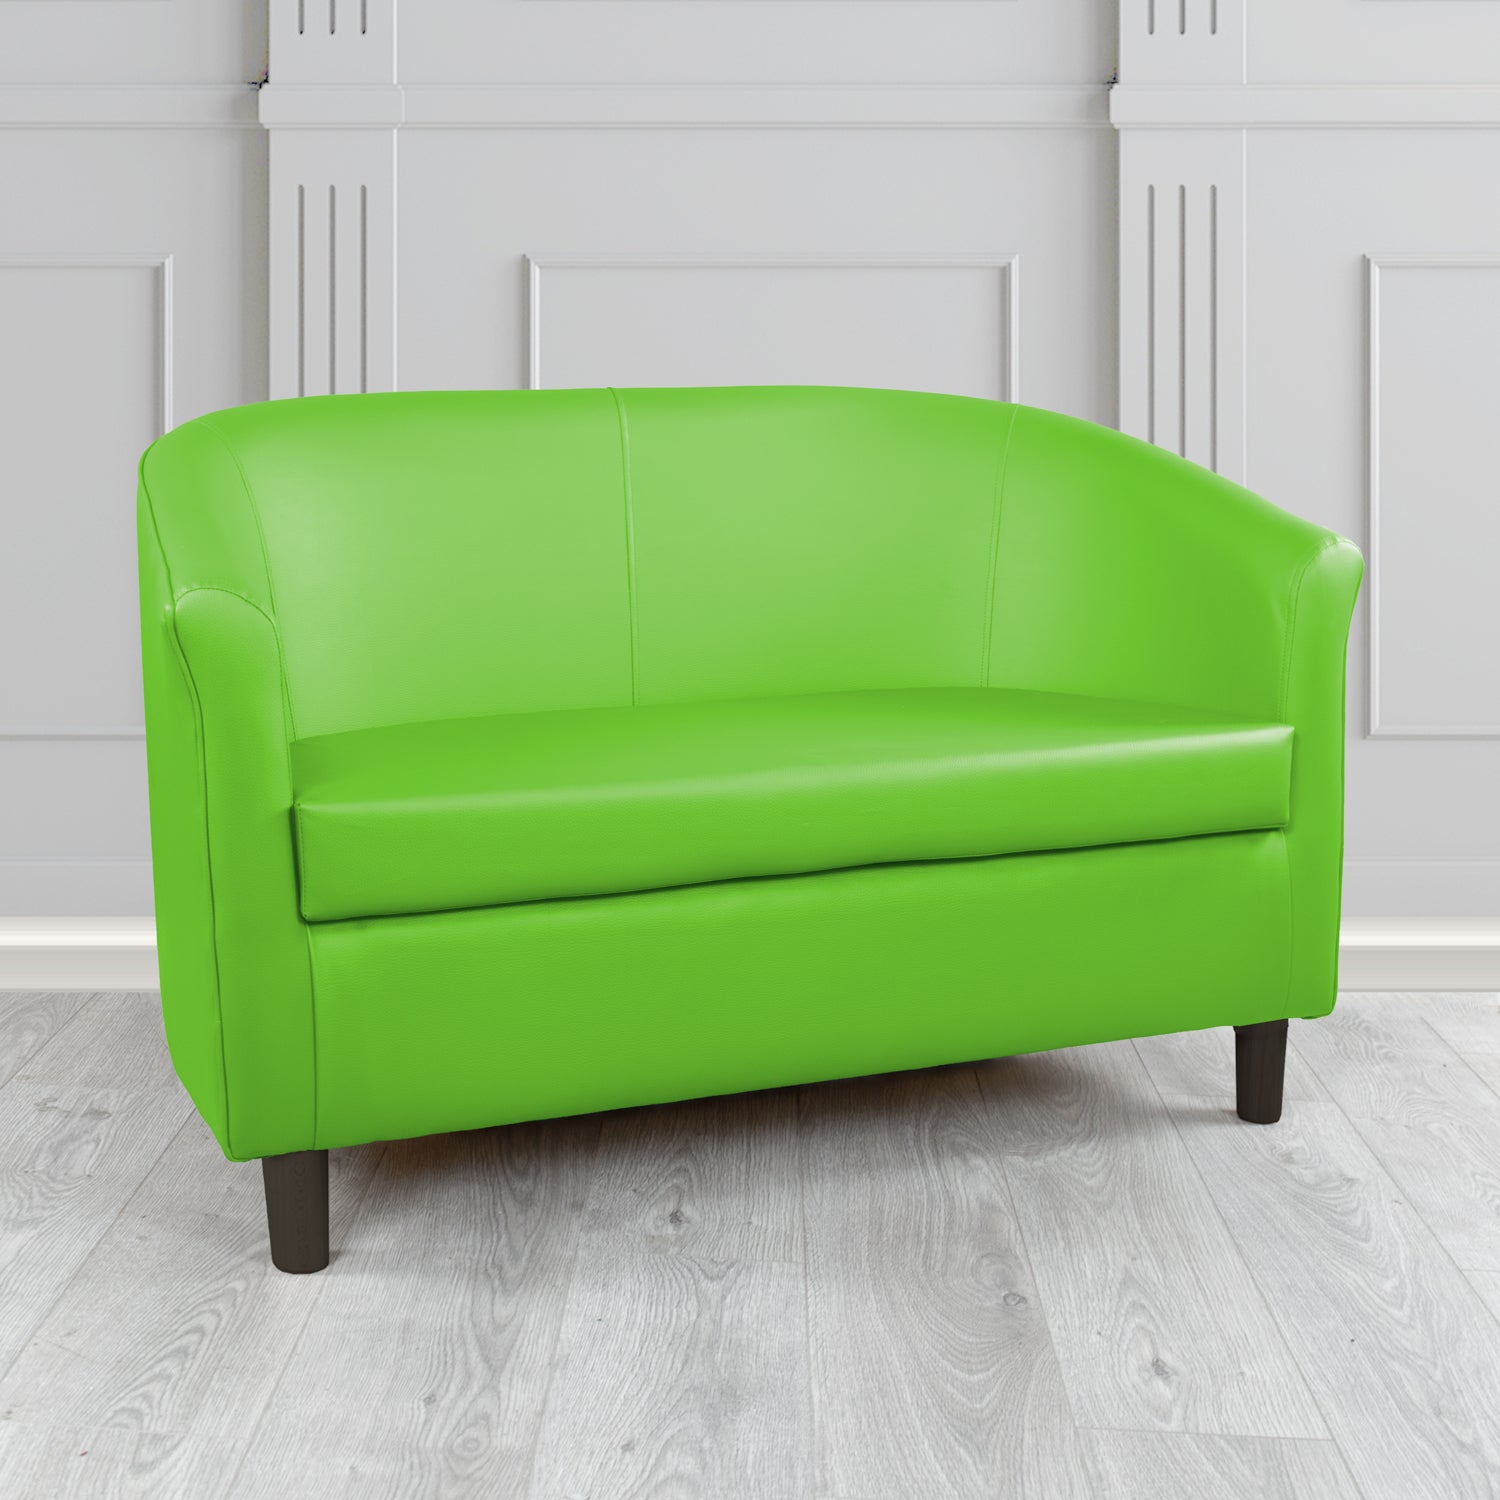 Tuscany 2 Seater Tub Sofa in Madrid Lime Faux Leather - The Tub Chair Shop